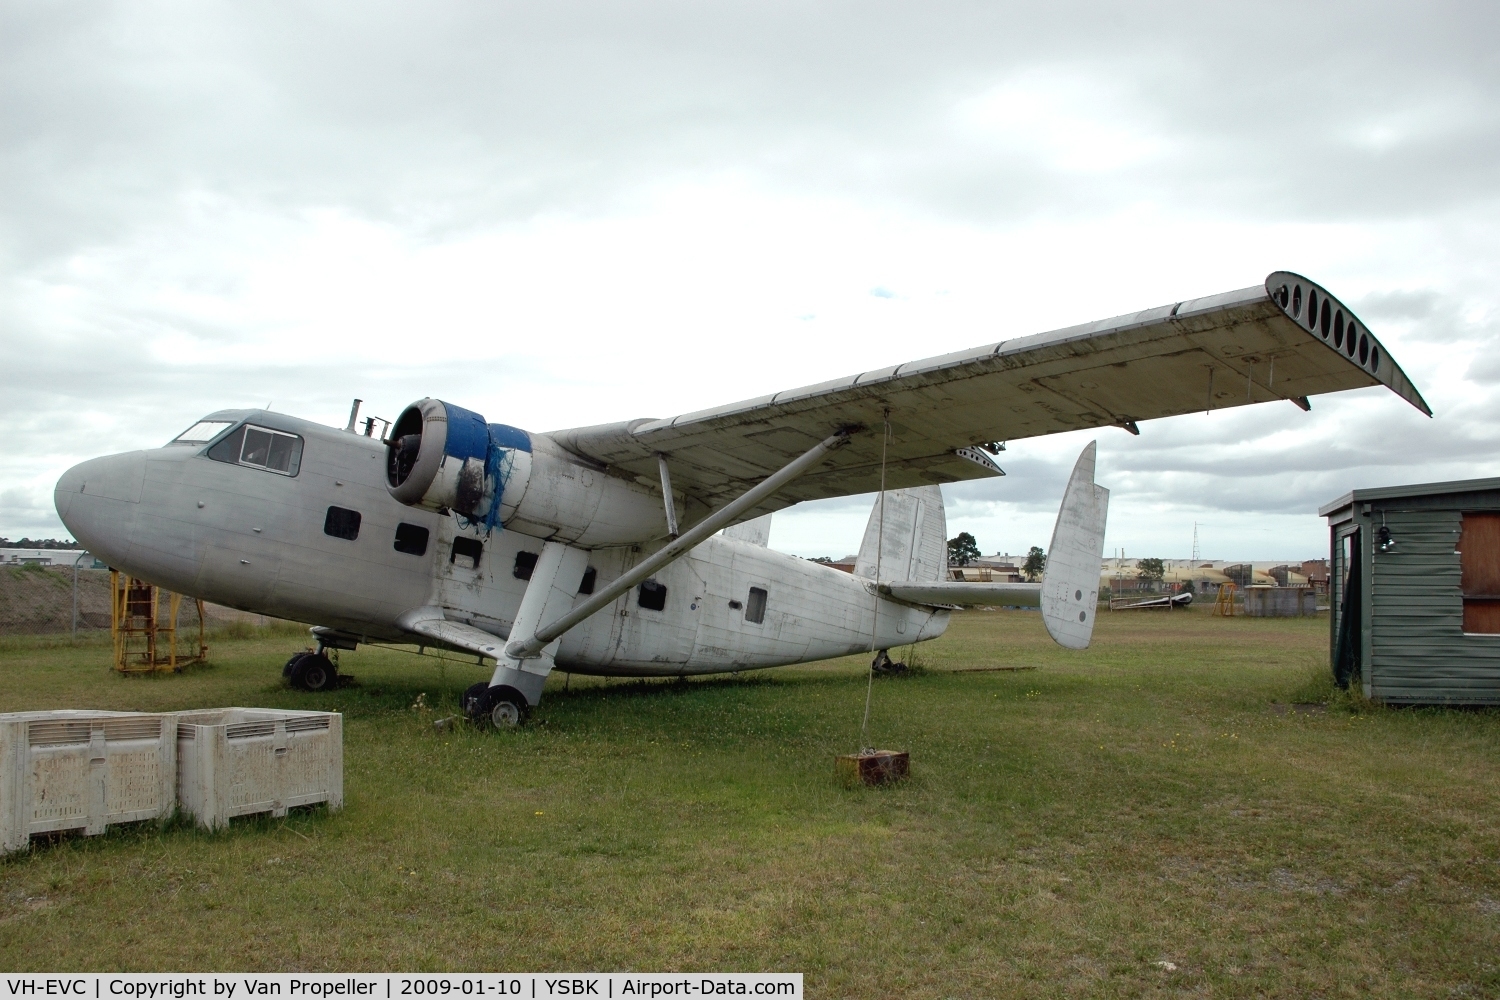 VH-EVC, Scottish Aviation Twin Pioneer Srs3 C/N 578, Scottish Aviation Twin Pioneer Srs 3 at the Australian Aviation Museum at Bankstown airport, NSW, 2009